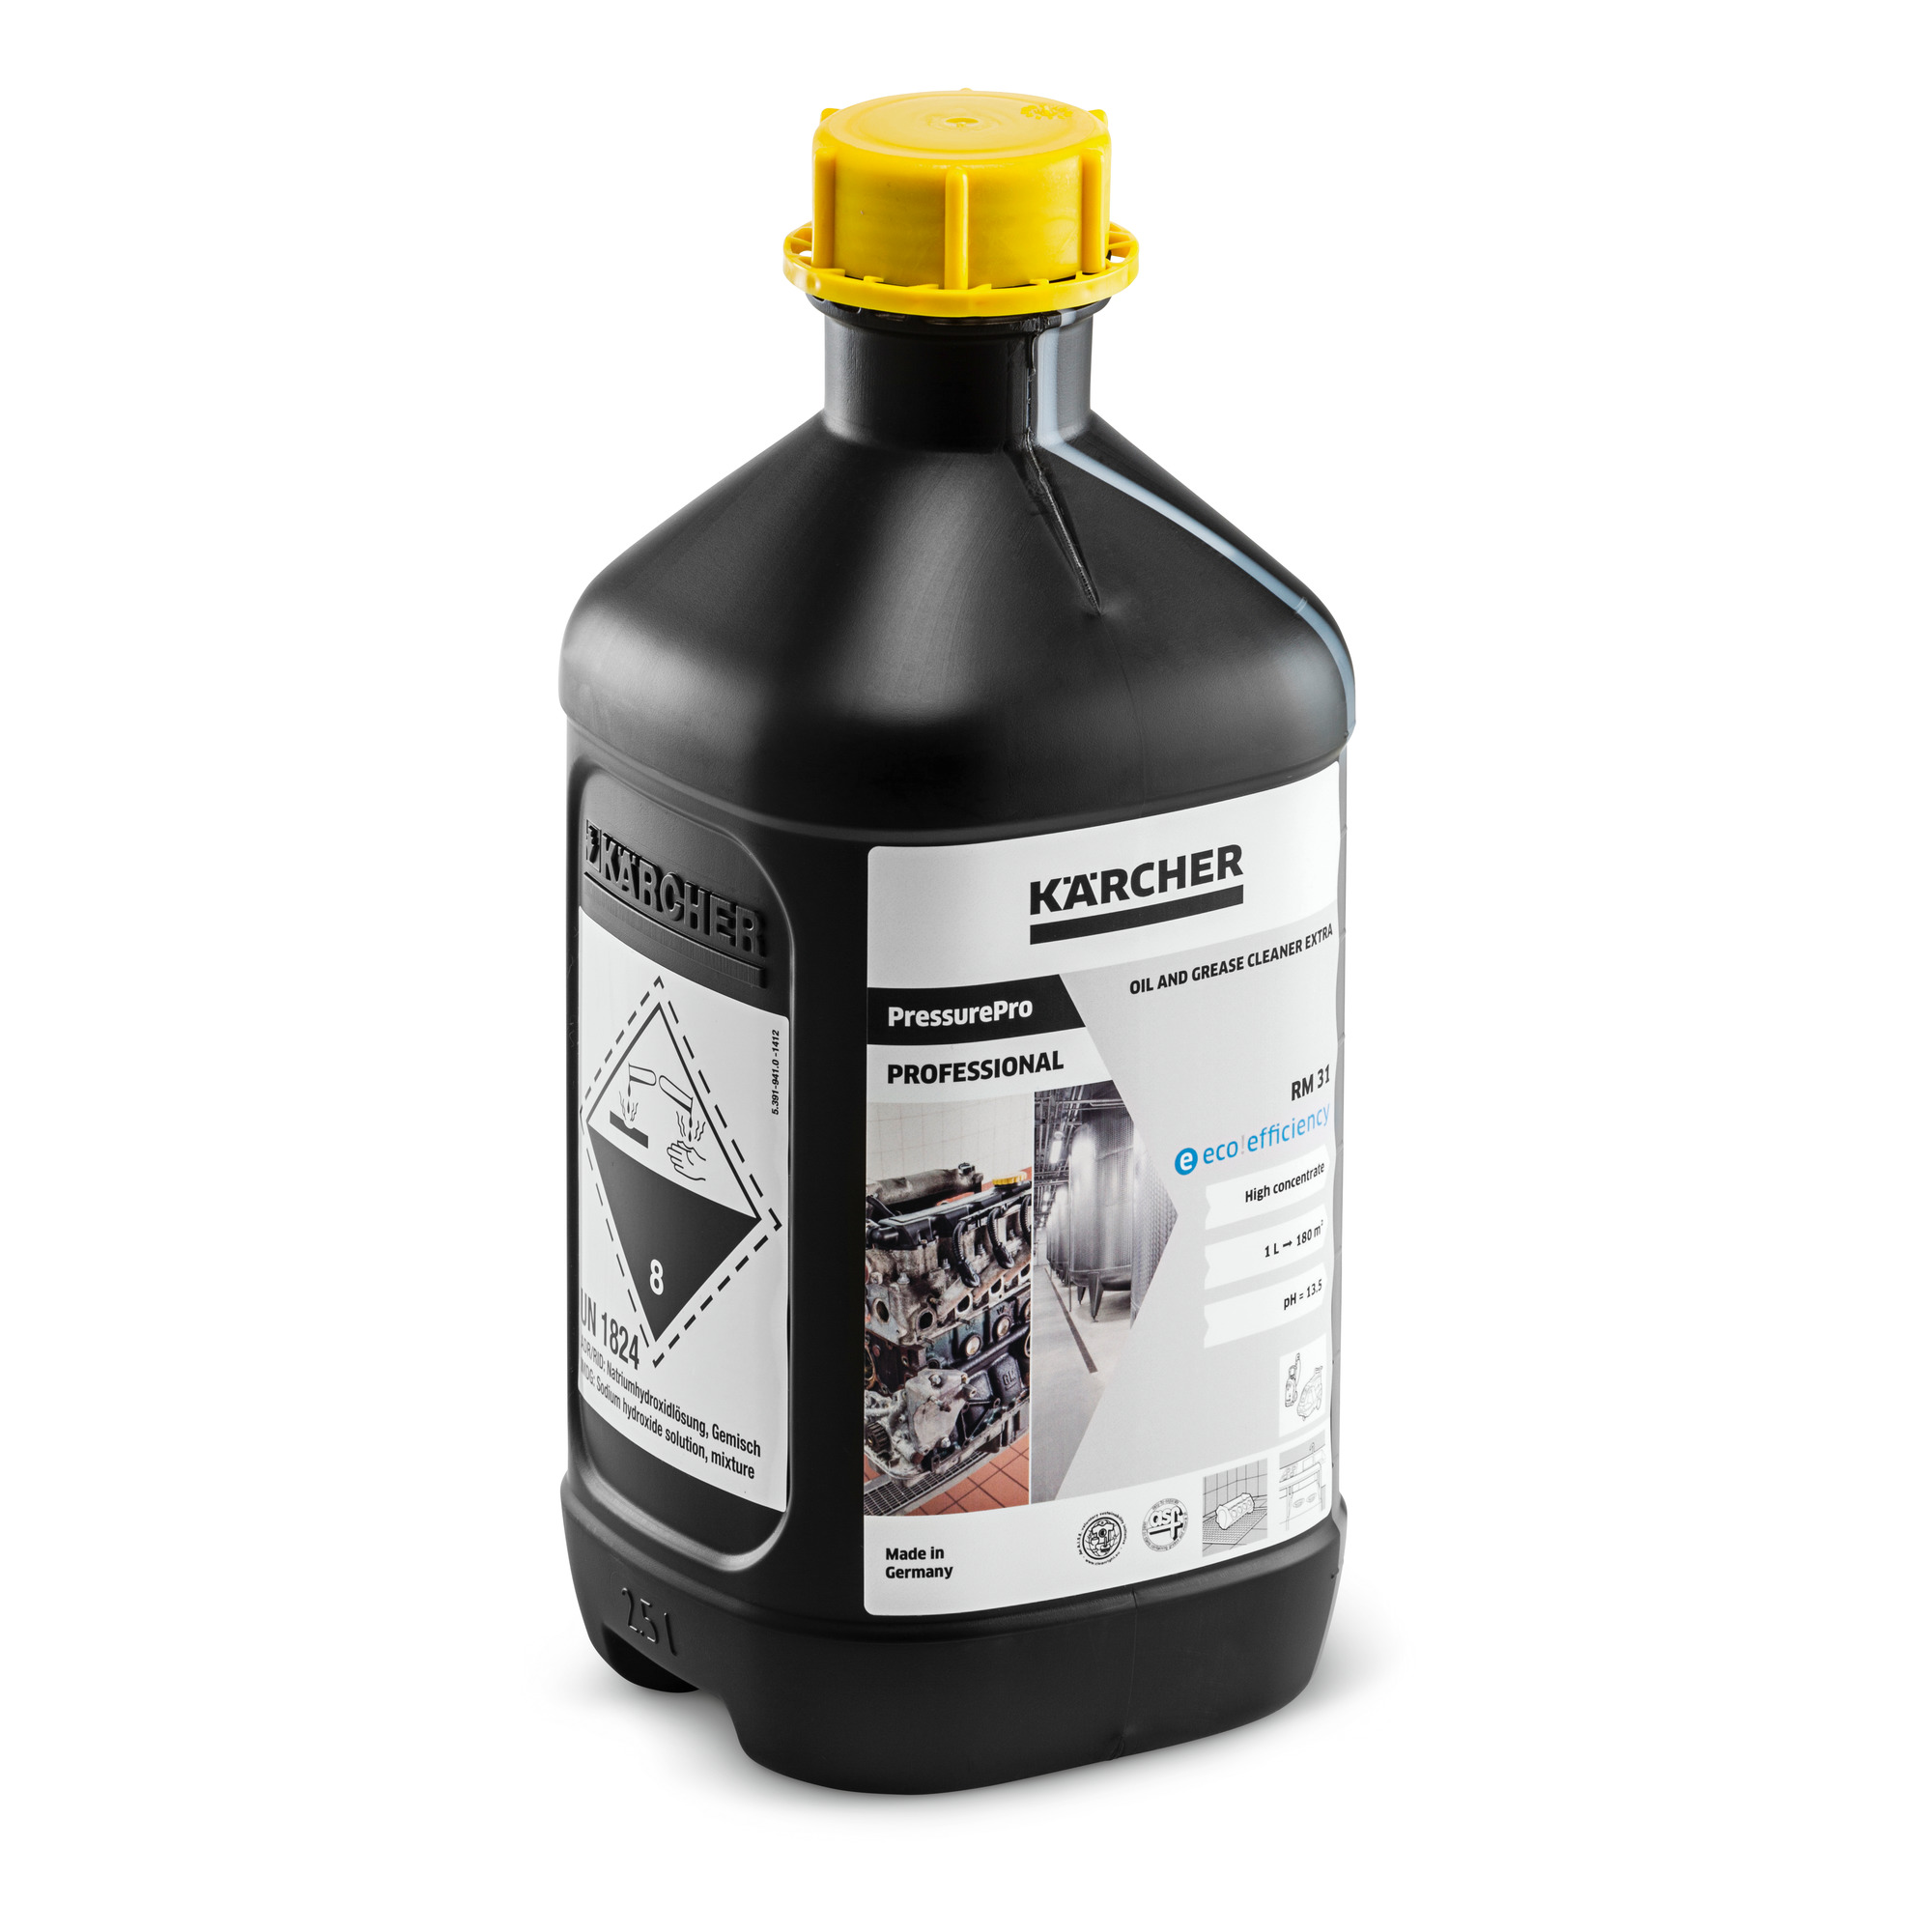 Kaercher PressurePro Oil and Grease Cleaner Extra RM 31 eco!efficiency